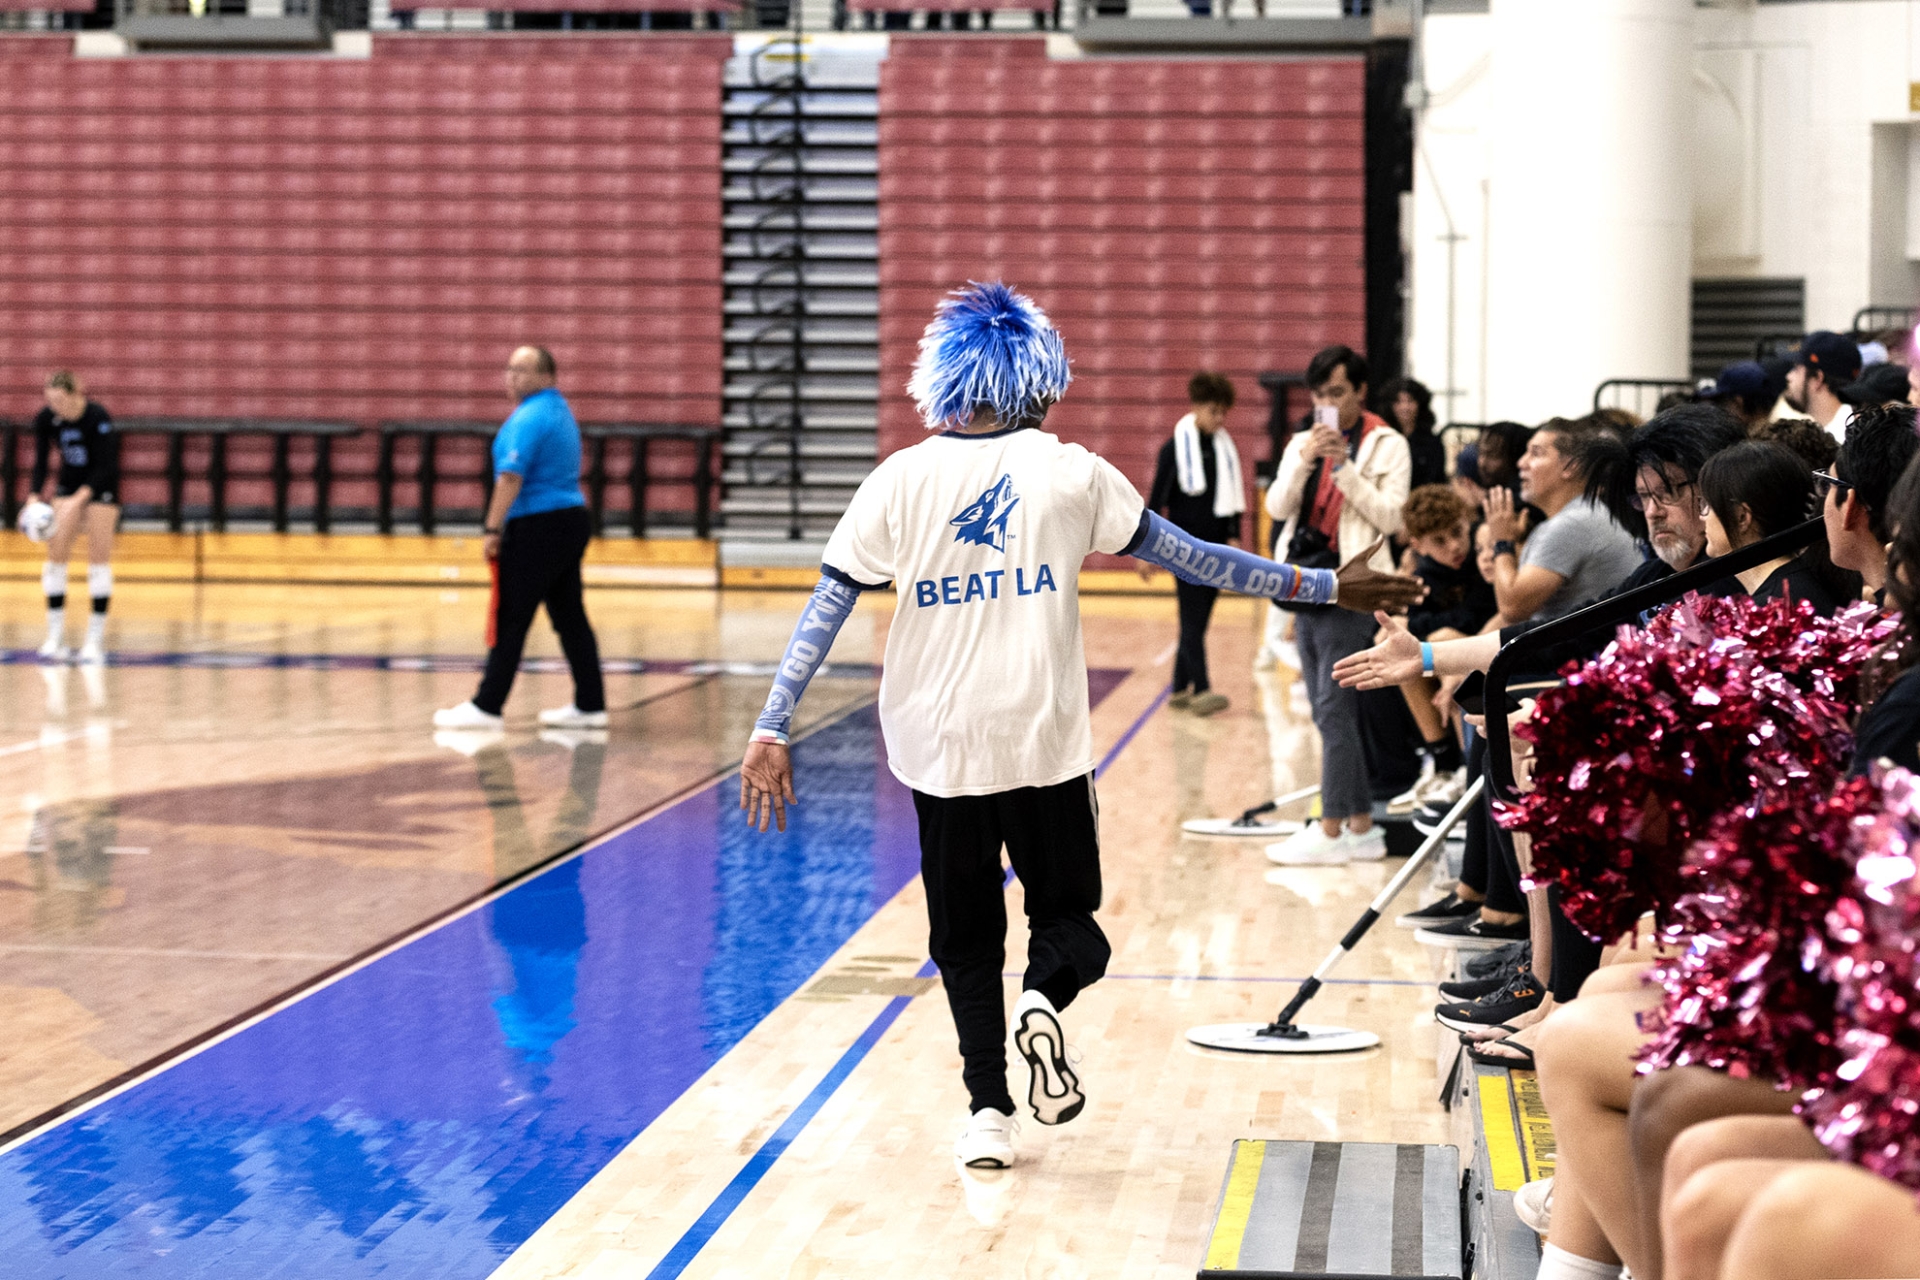 A person dressed up in CSUSB gear at the volleyball game